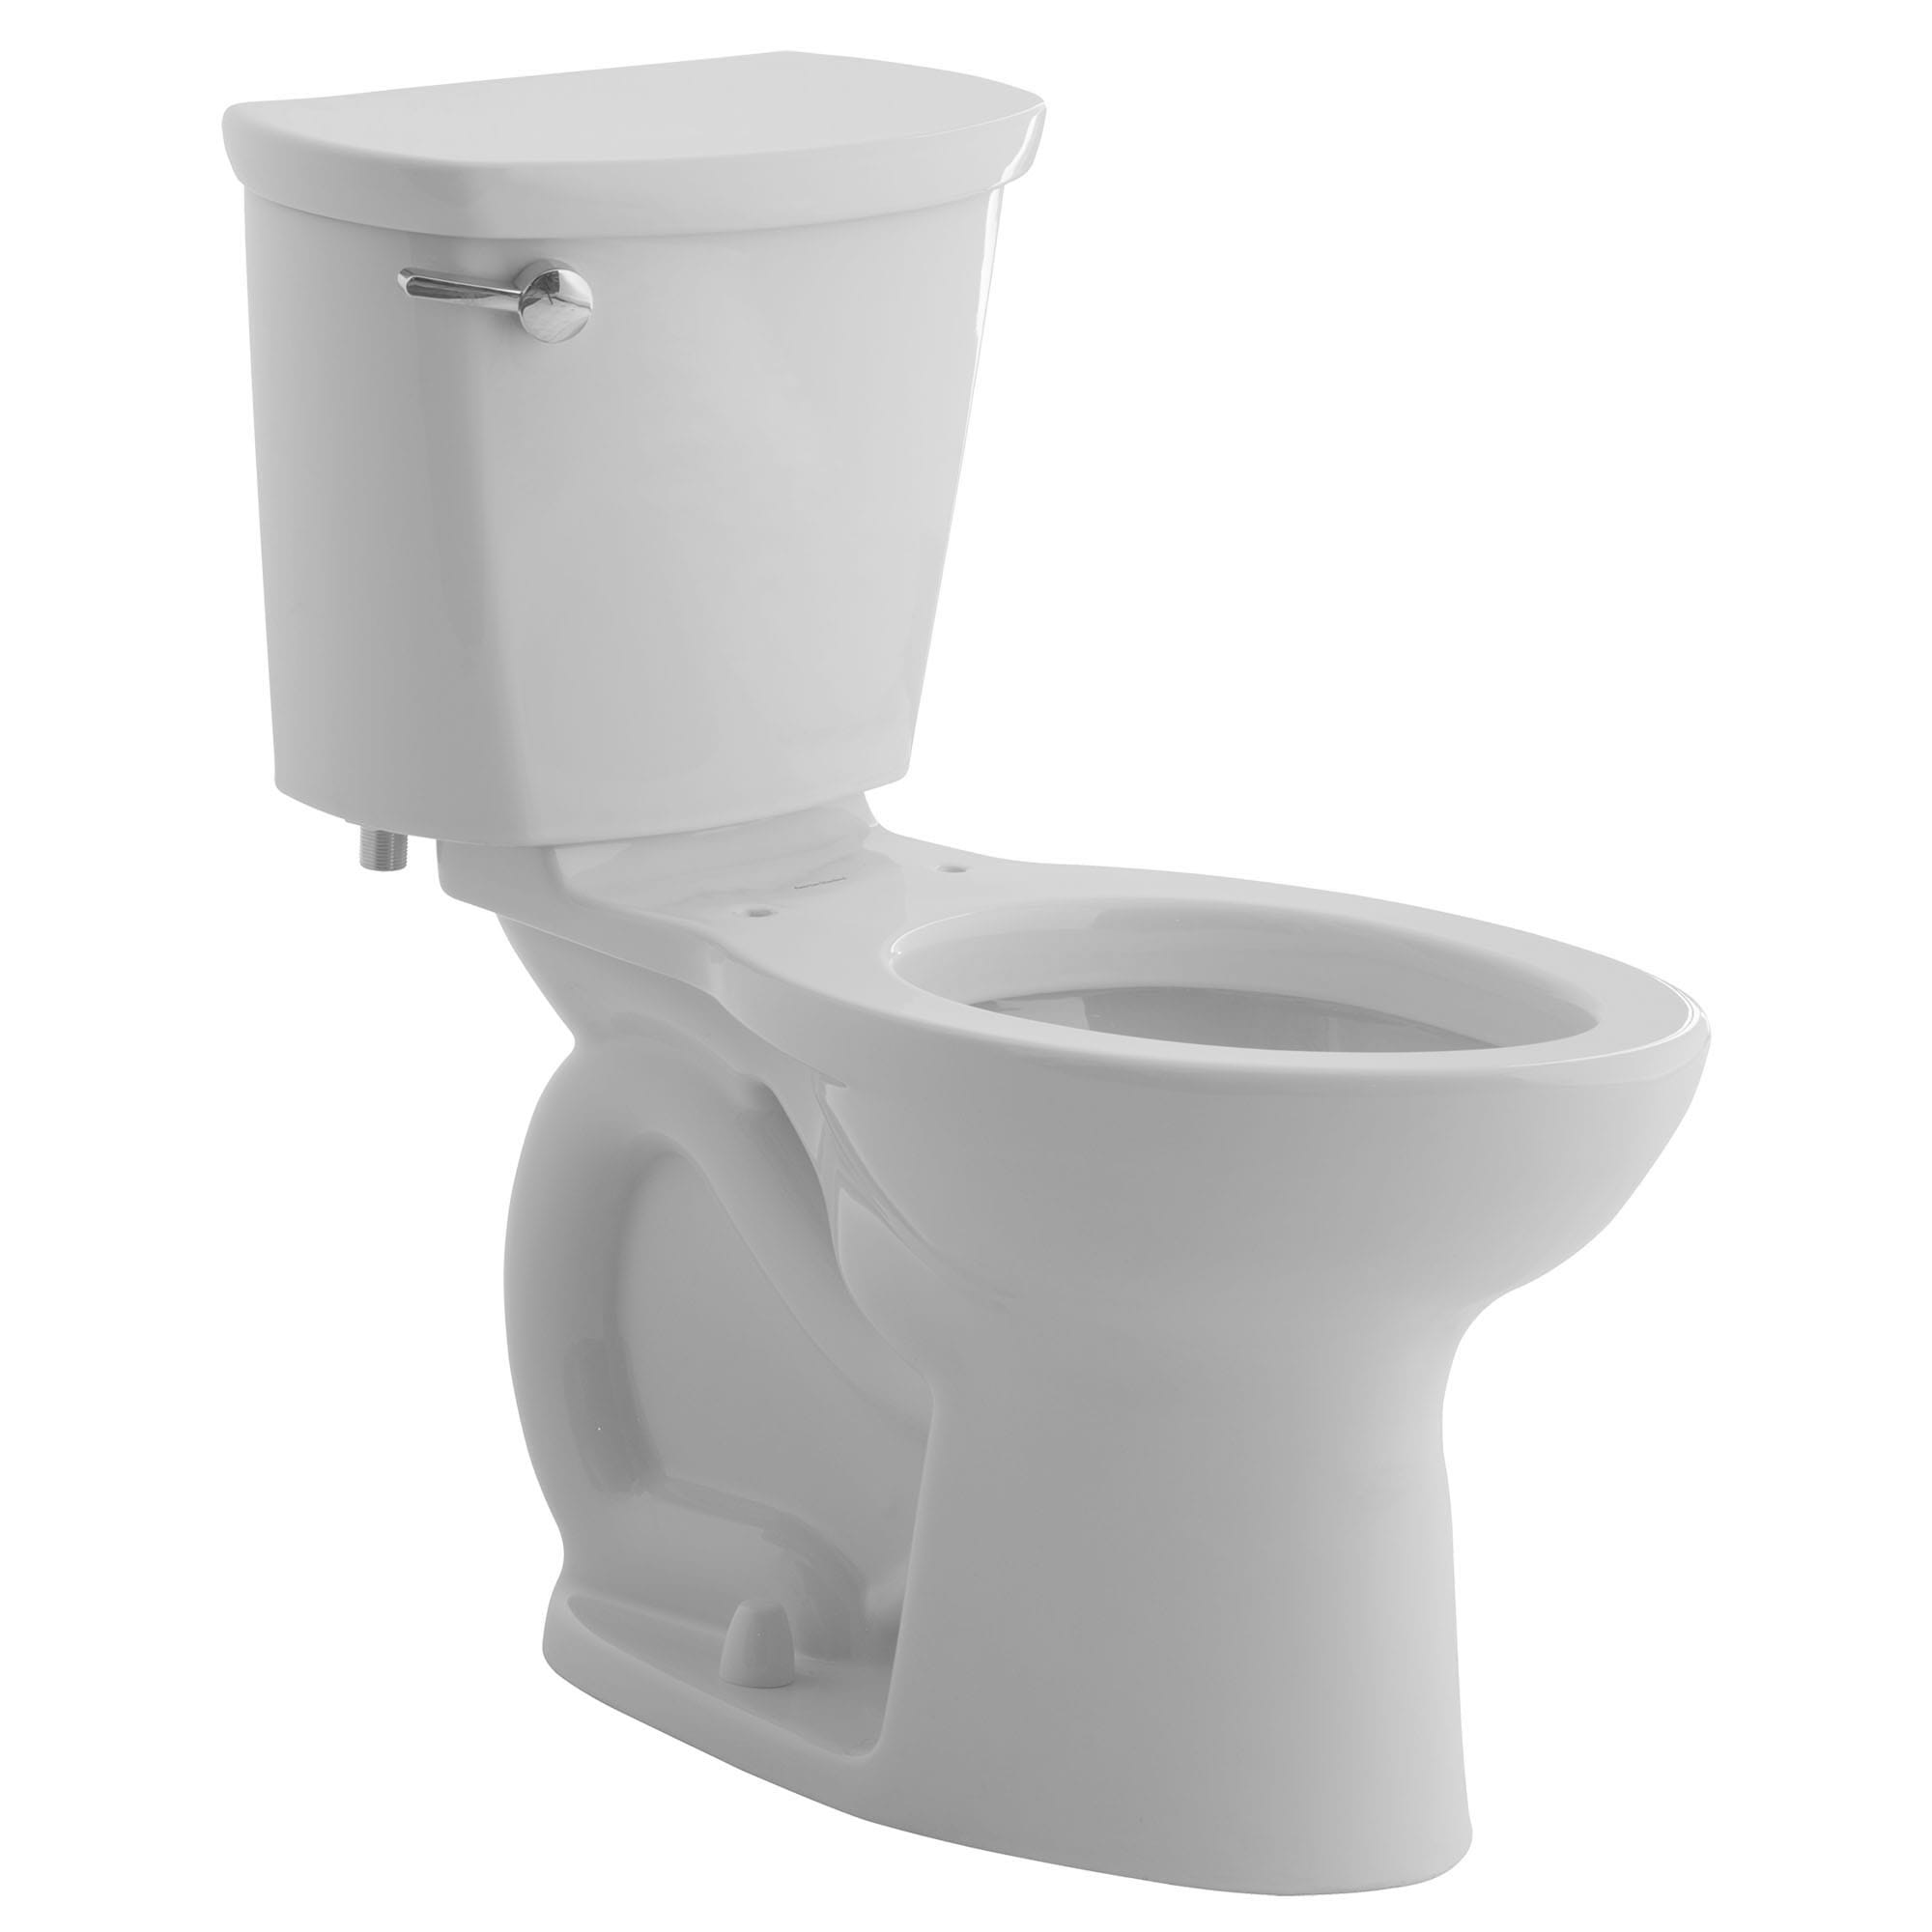 Cadet PRO Two Piece 16 gpf 60 Lpf Standard Height Elongated Toilet Less Seat WHITE